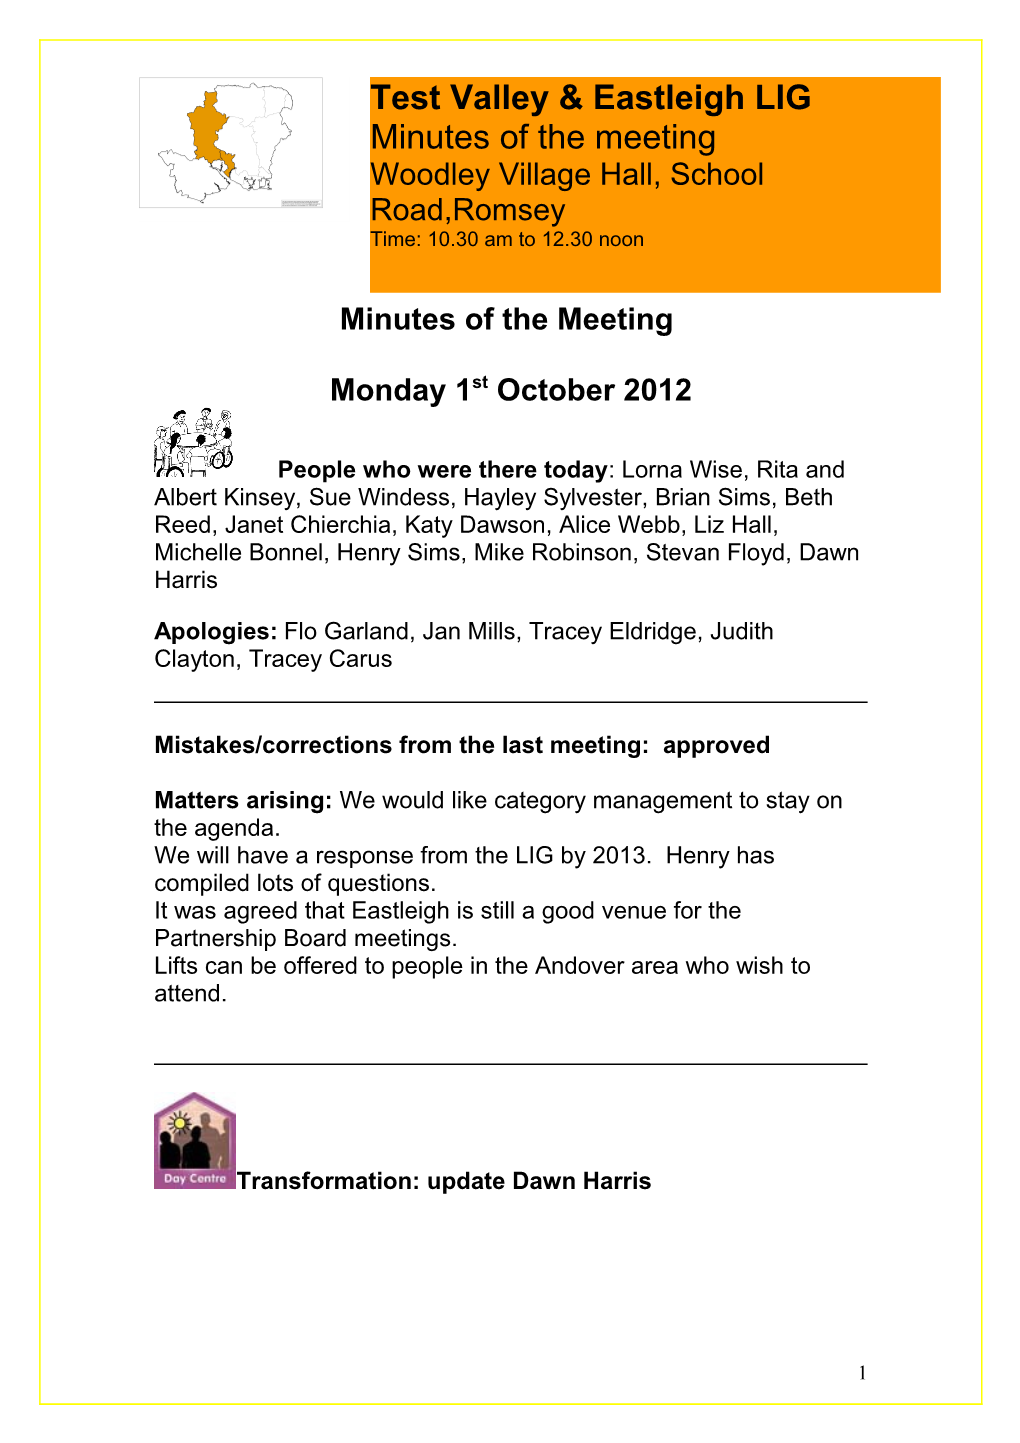 Mistakes/Corrections from the Last Meeting: Approved